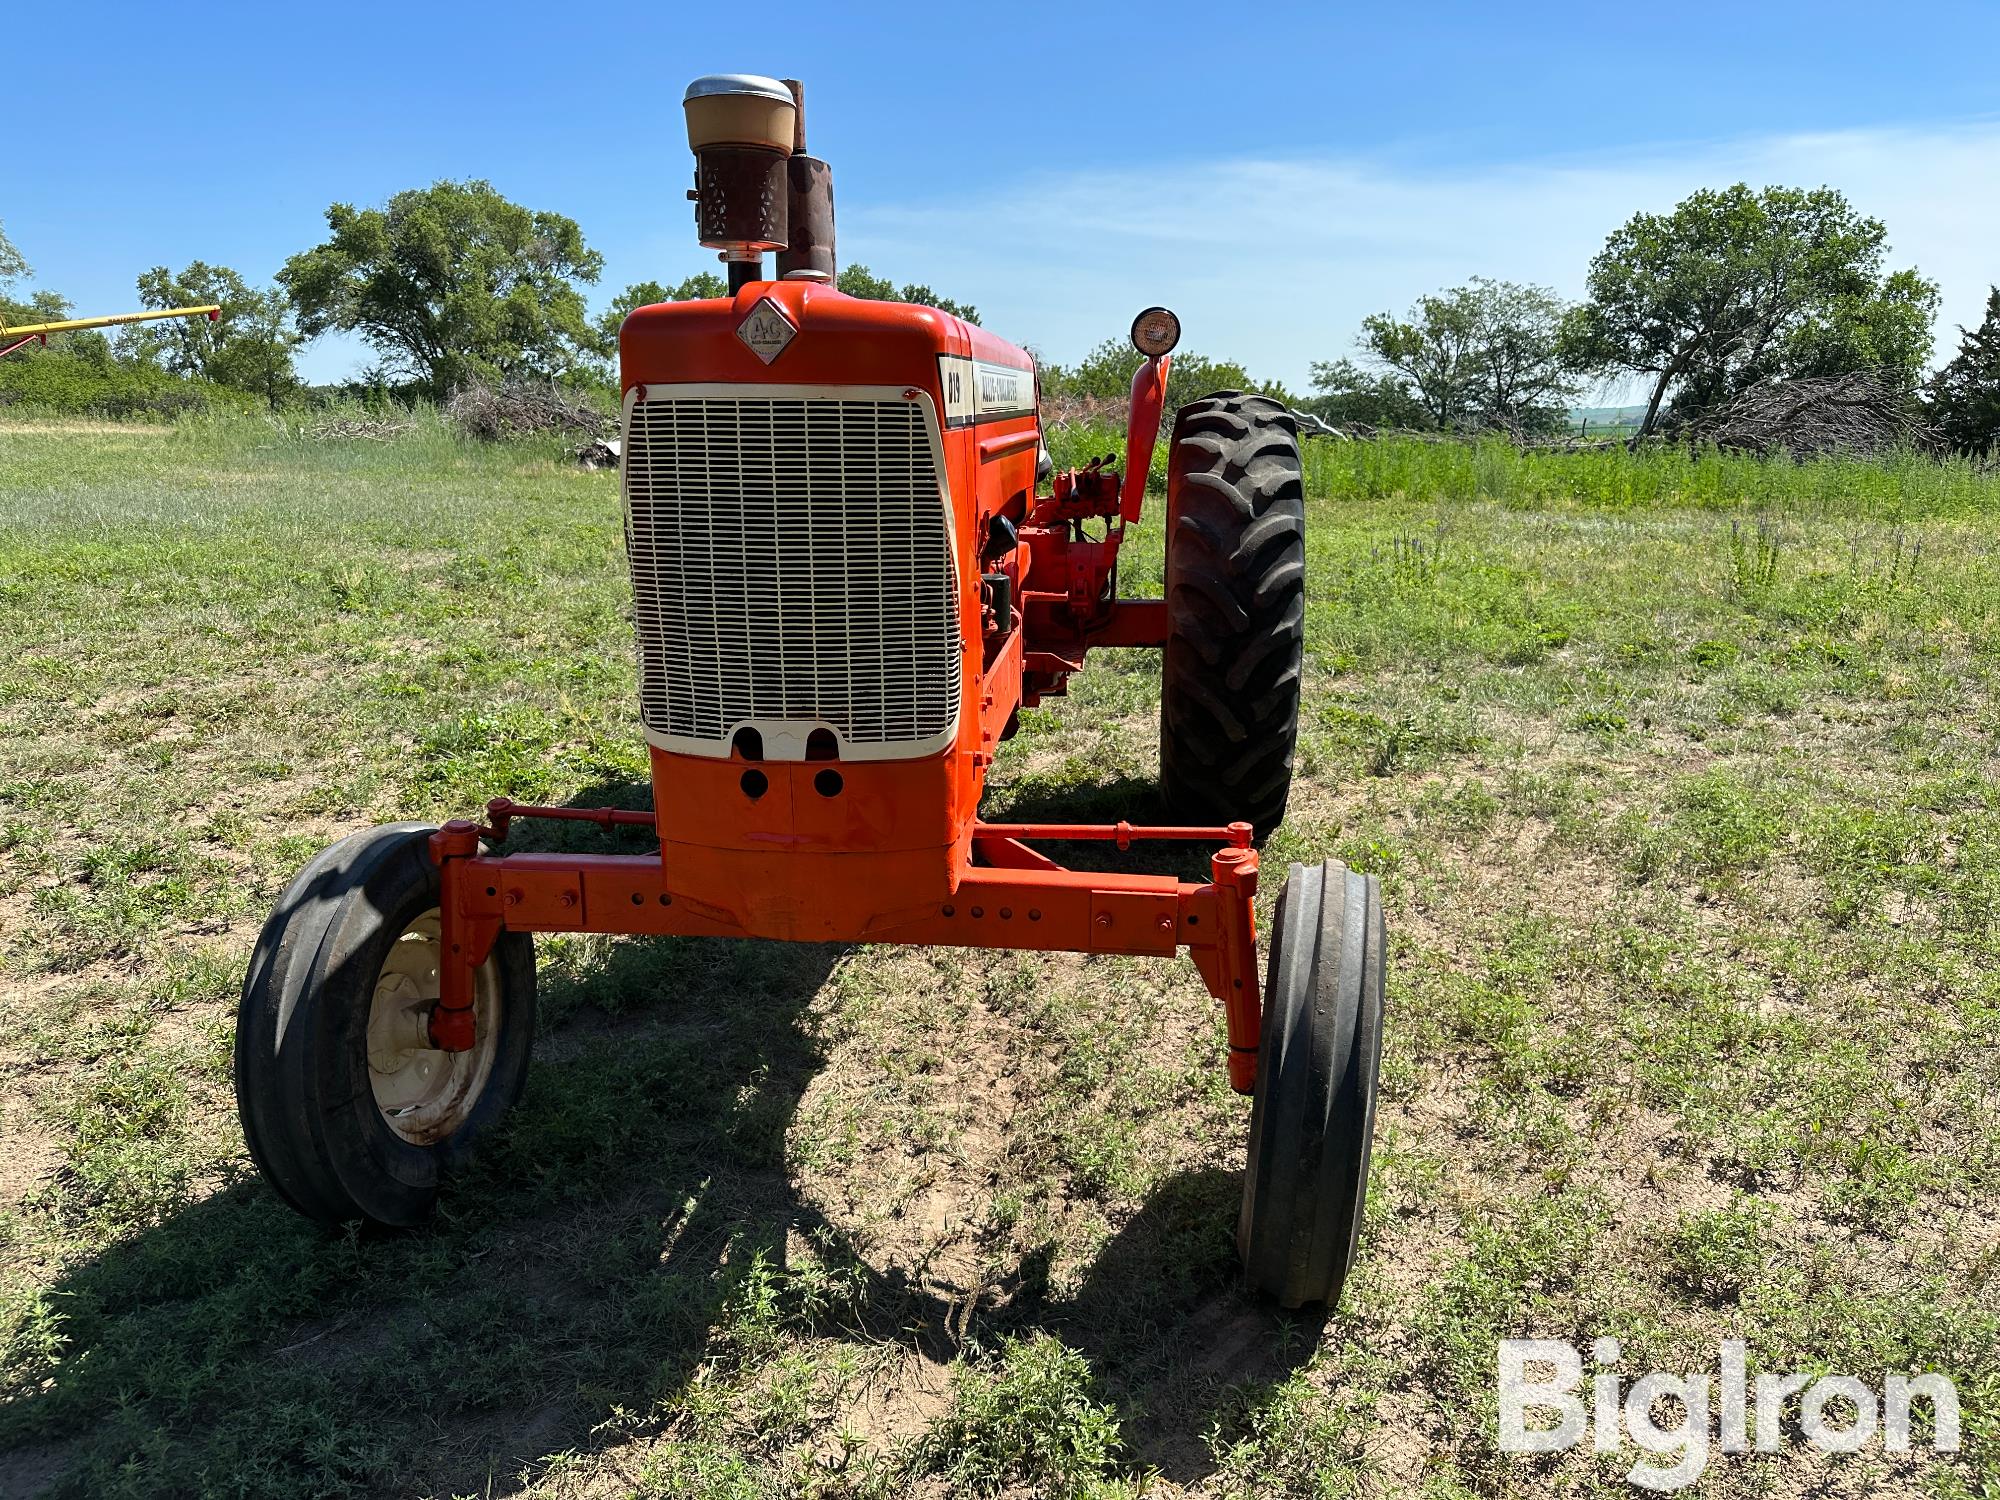 1962 Allis-Chalmers D17 Series 3 2WD Tractor BigIron Auctions